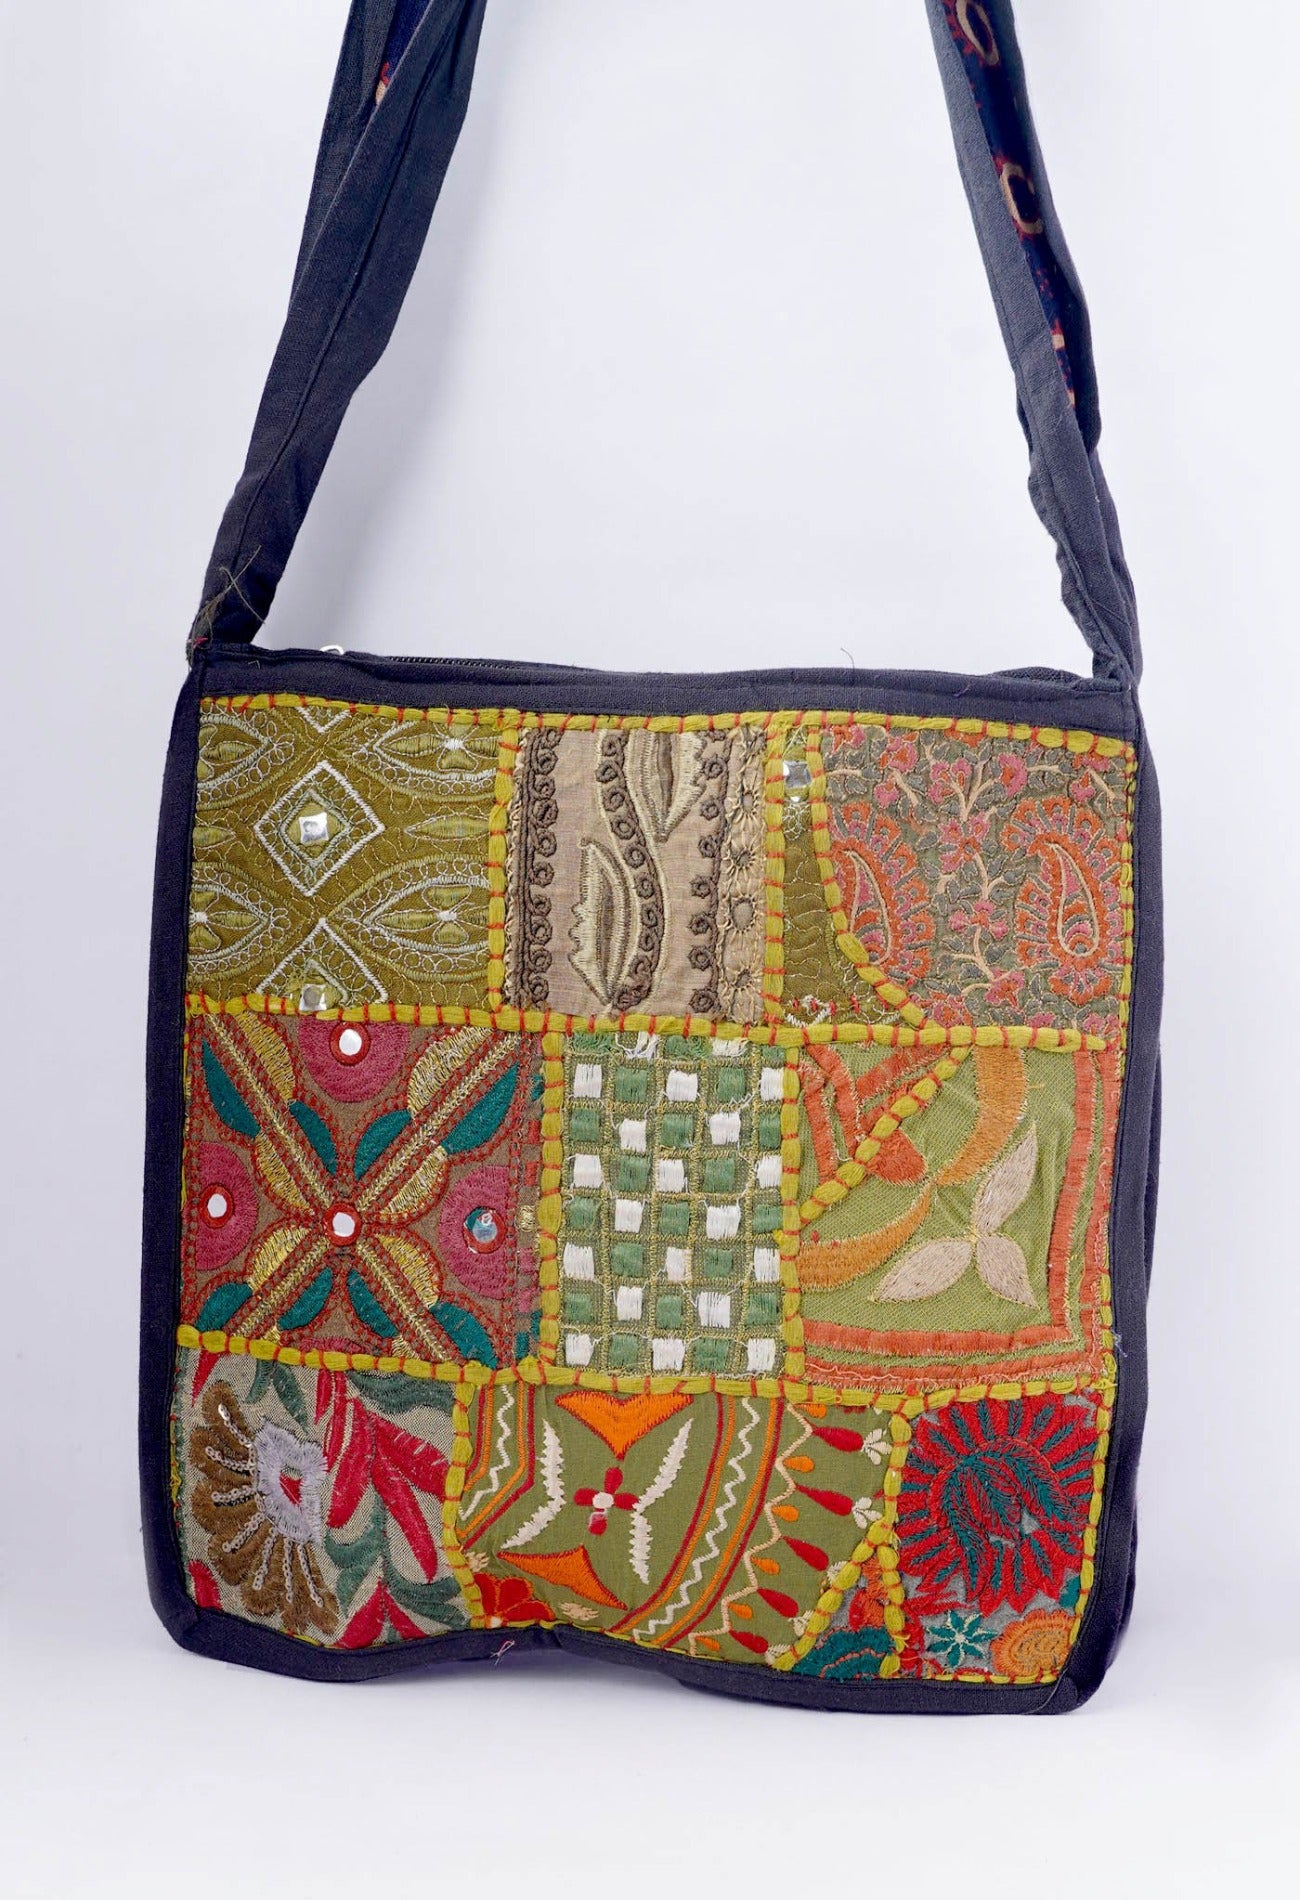 Online Shopping for Multi Indian Handicraft Embroidered Hand Bag with Weaving from Rajasthan at Unnatisilks.com India_x000D_
Online Shopping for Multi Indian Handicraft Embroidered Hand Bag with Weaving from Rajasthan at Unnatisilks.com India_x000D_
Online Shopping for Multi Indian Handicraft Embroidered Hand Bag with Weaving from Rajasthan at Unnatisilks.com India_x000D_
Online Shopping for Multi Indian Handicraft Embroidered Hand Bag with Weaving from Rajasthan at Unnatisilks.com India_x000D_
